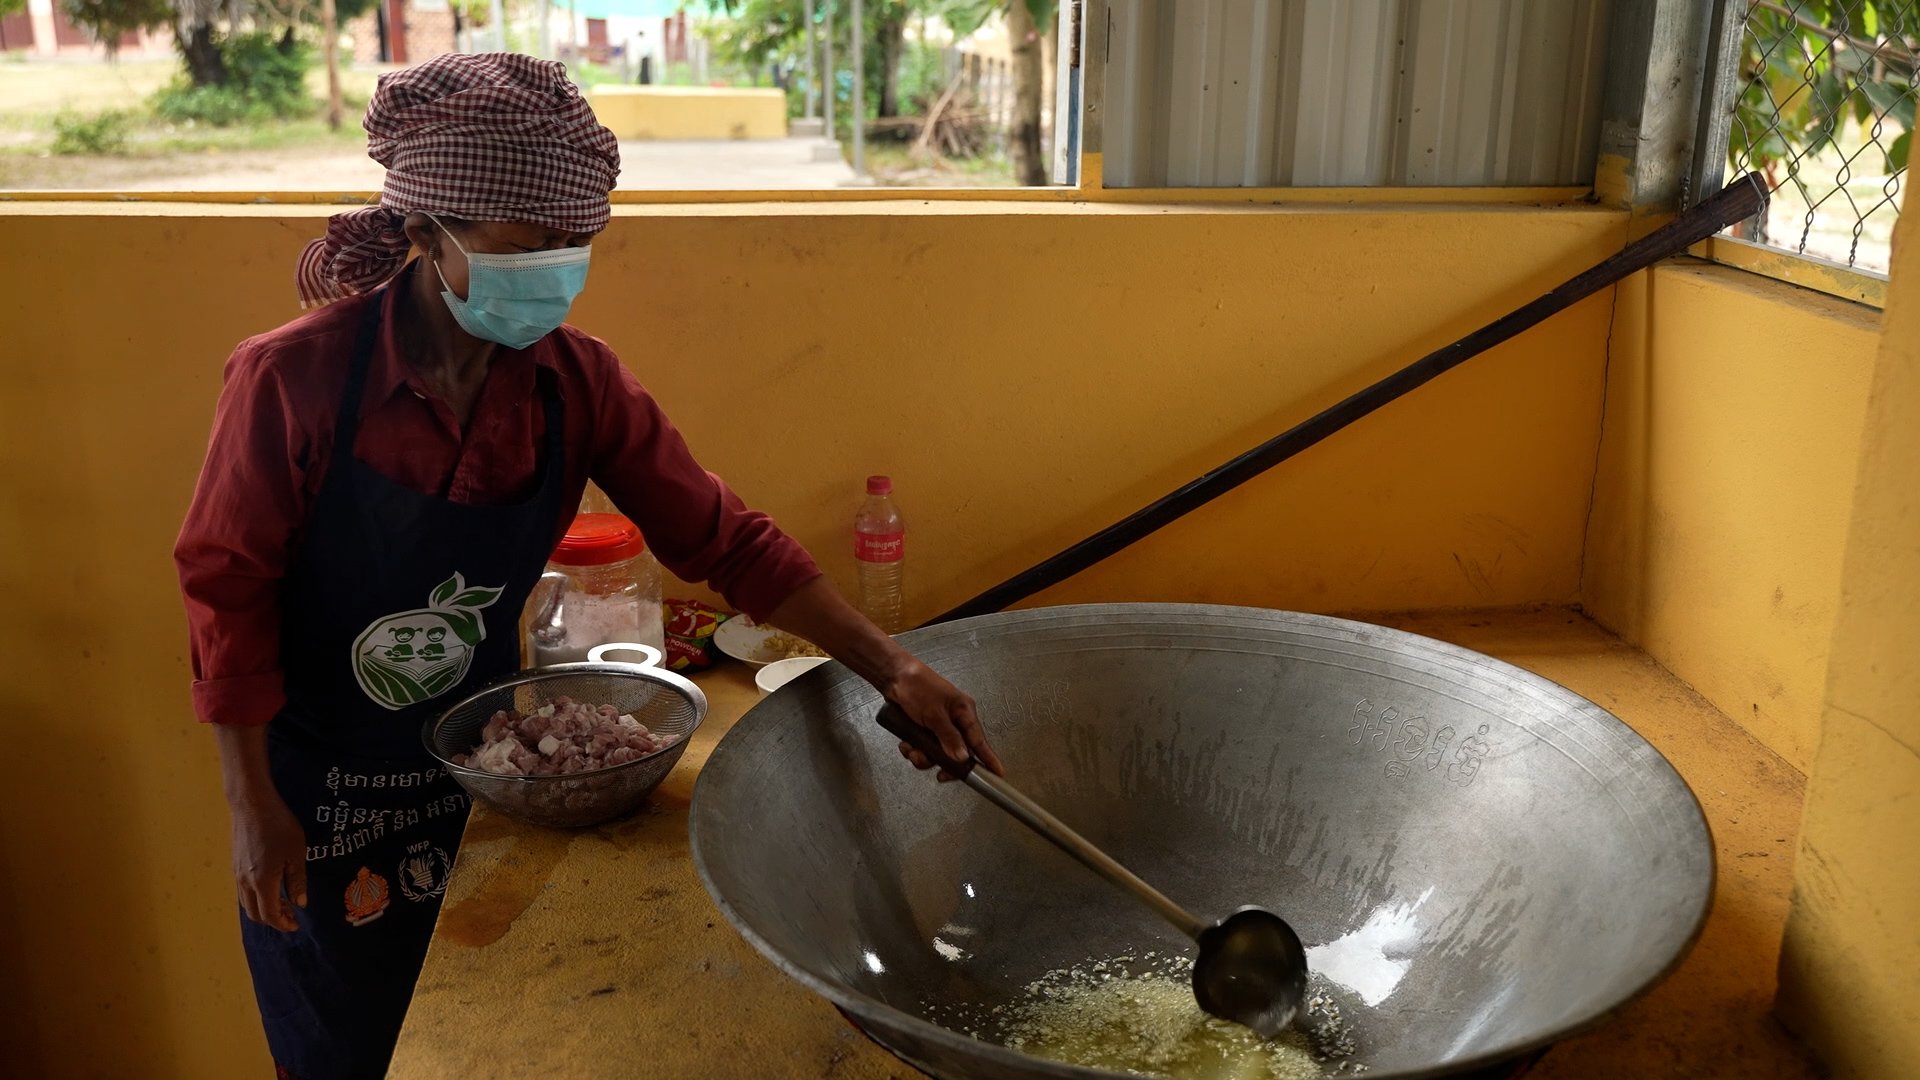 Cook stirs garlic. Frame grab working as a camera operator for WFP in Siem Reap